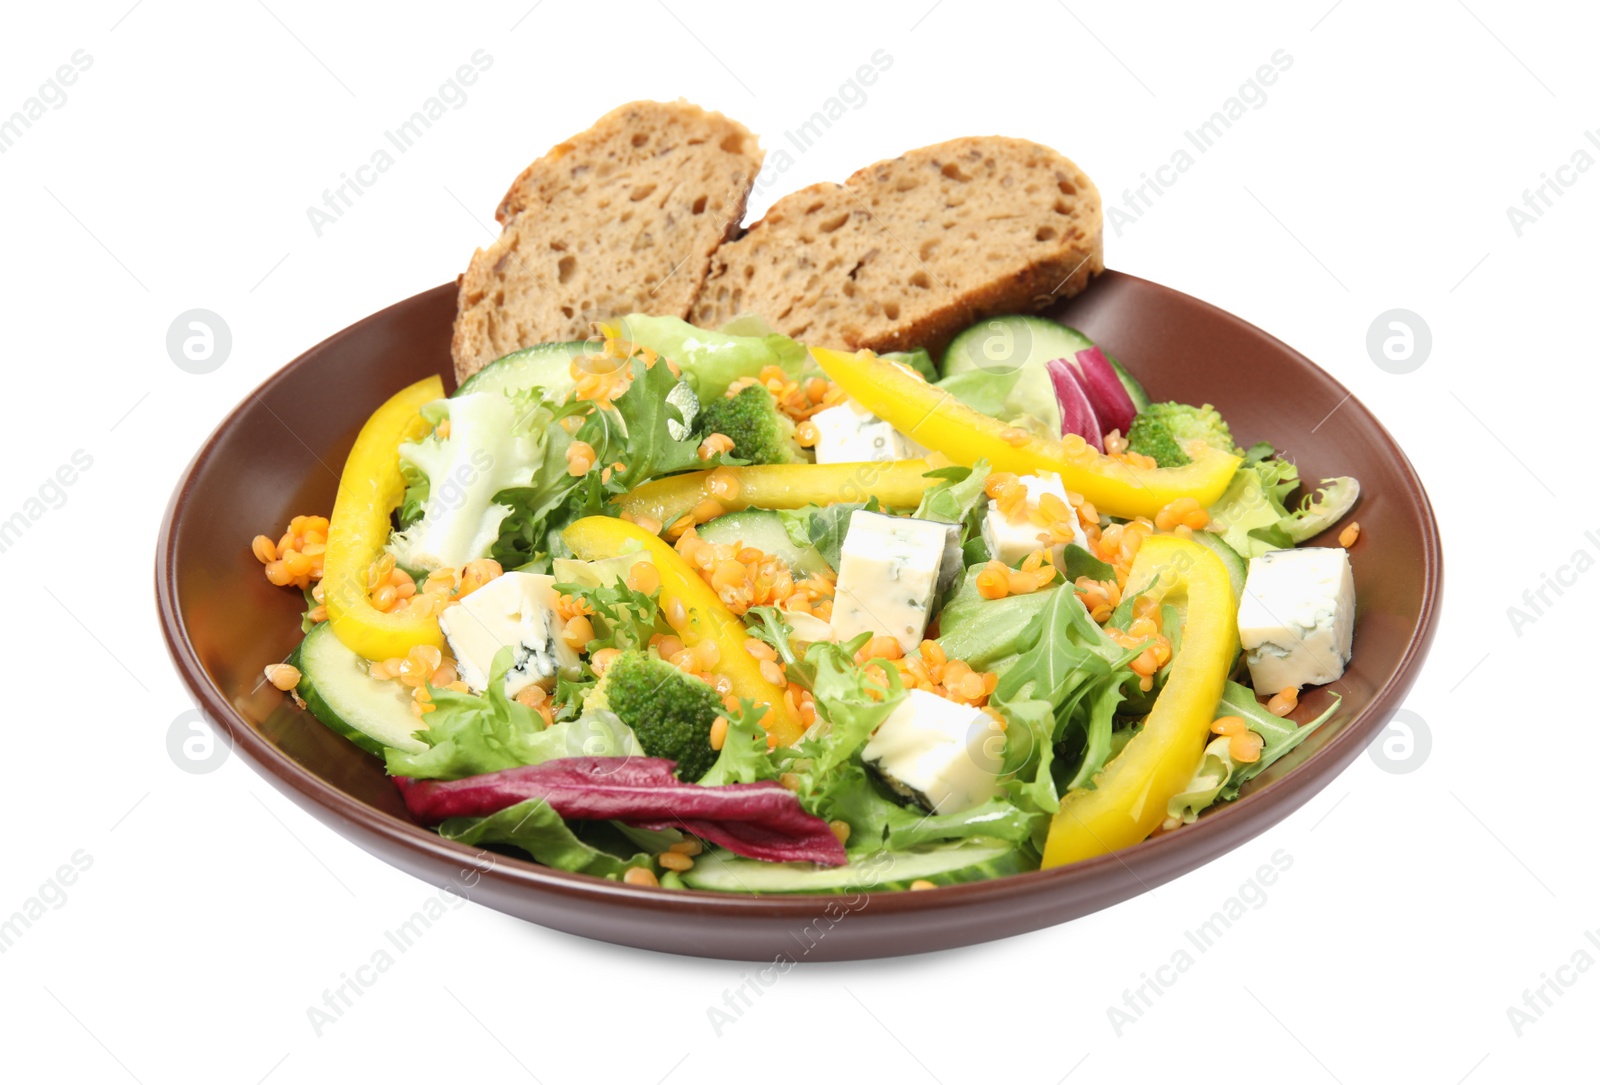 Photo of Plate of delicious salad with lentils, vegetables and bread isolated on white